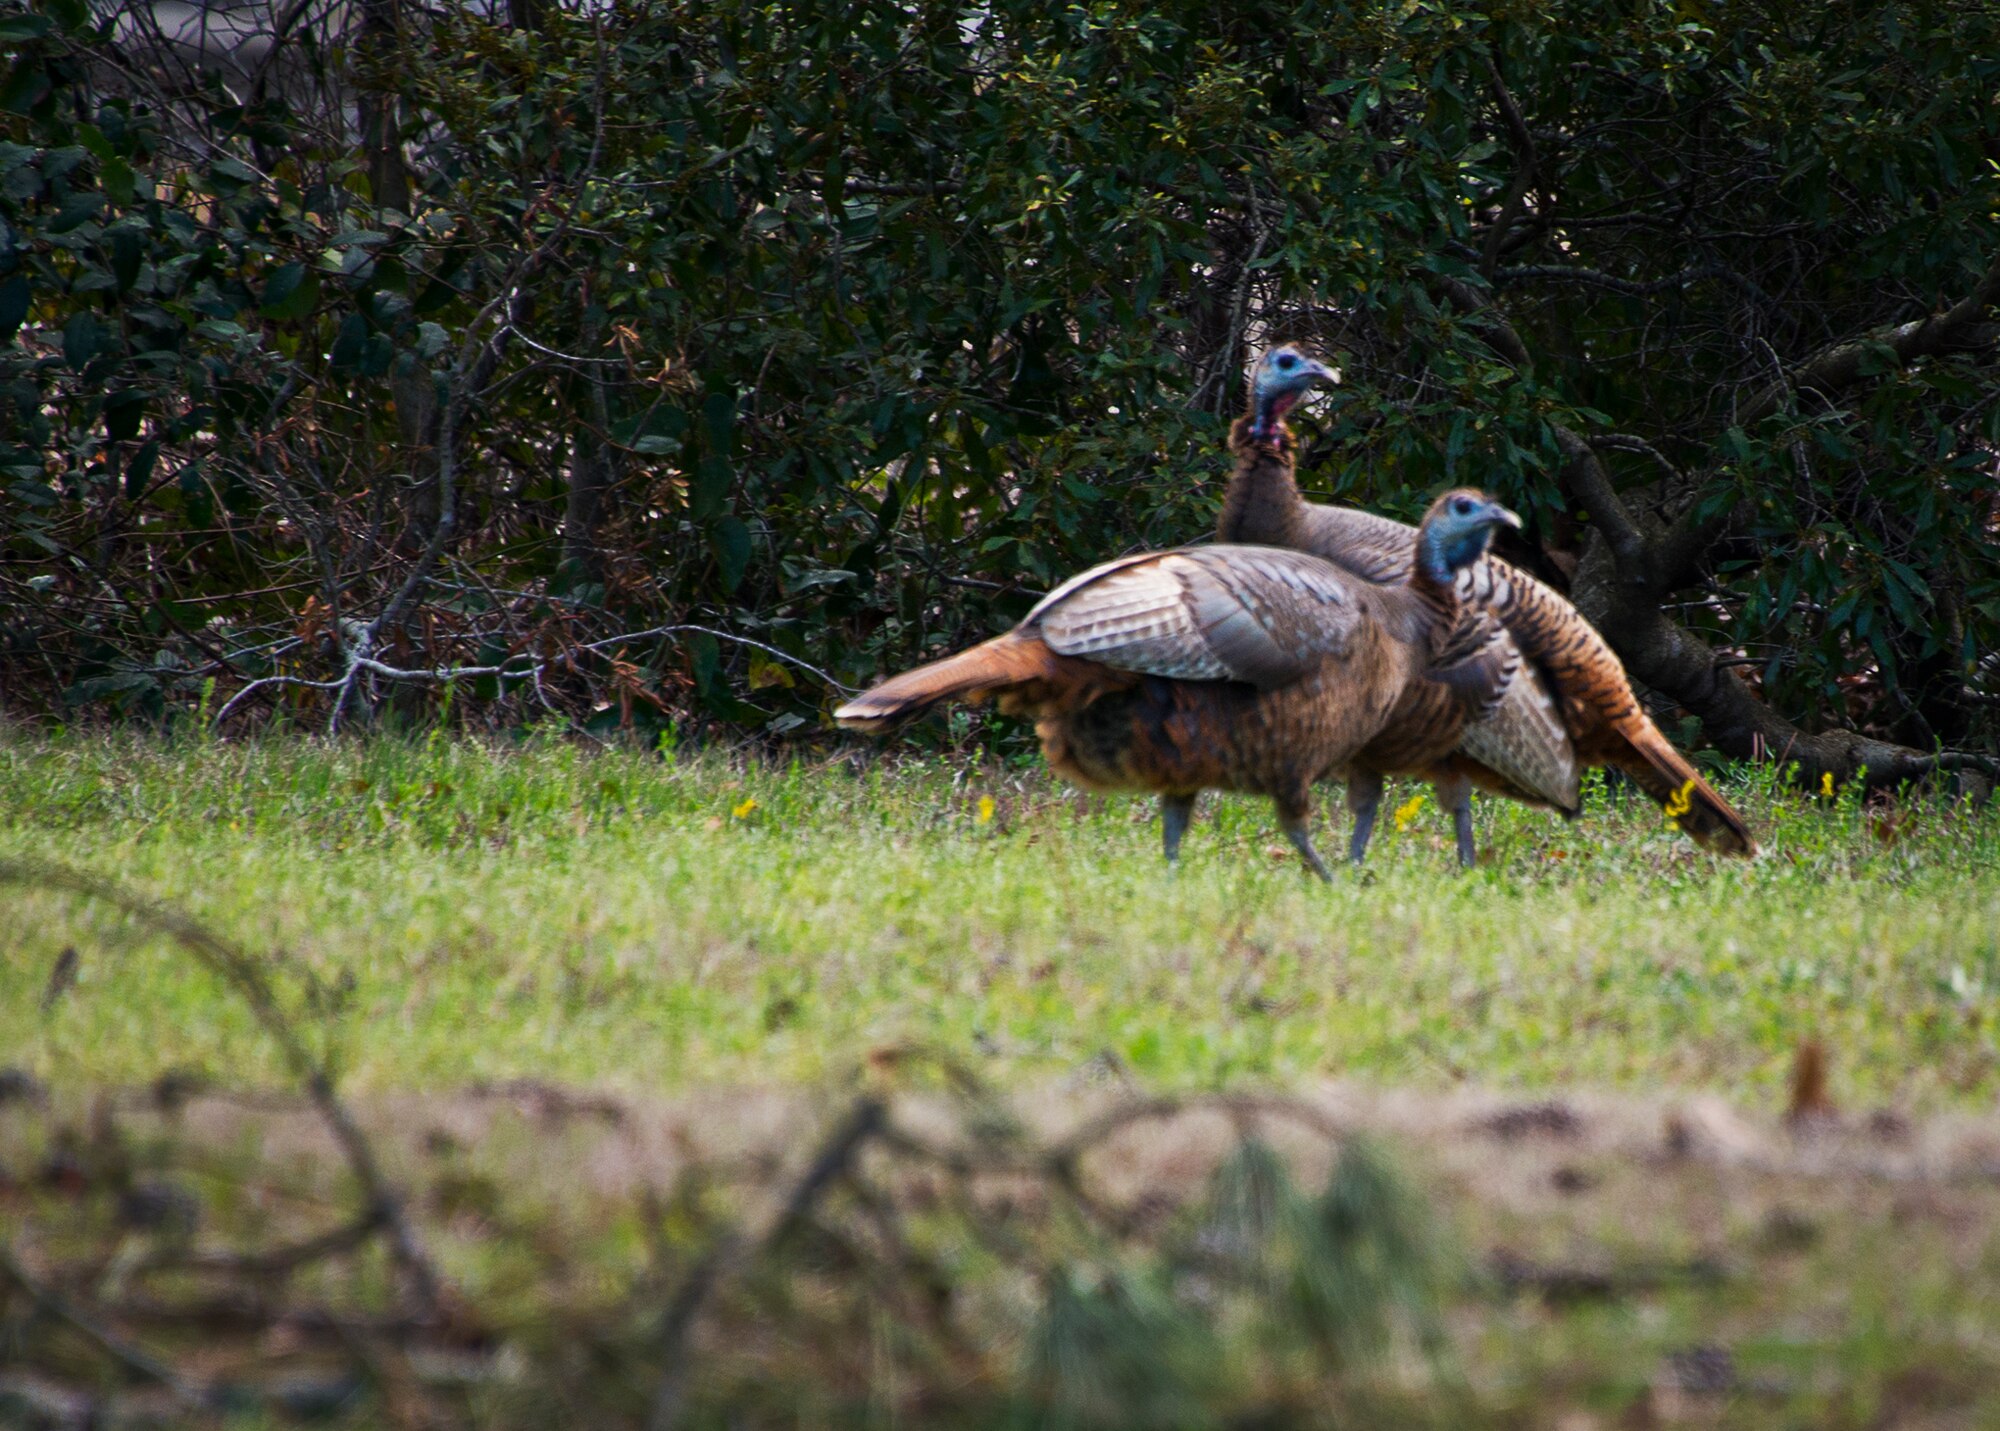 A couple of wild turkeys were spotted along Eglin Boulevard March 3 at Eglin Air Force Base, Fla.  Spring brings these normally reclusive birds out into the open to feed on new vegetative growth and insects.  The Eglin reservation has a sizable wild turkey population including a growing number on the main base.  For more information on wild turkeys or the upcoming turkey seasons, call Jackson Guard at 882-4165 or 4166.  (U.S. Air Force photo/Samuel King Jr.)